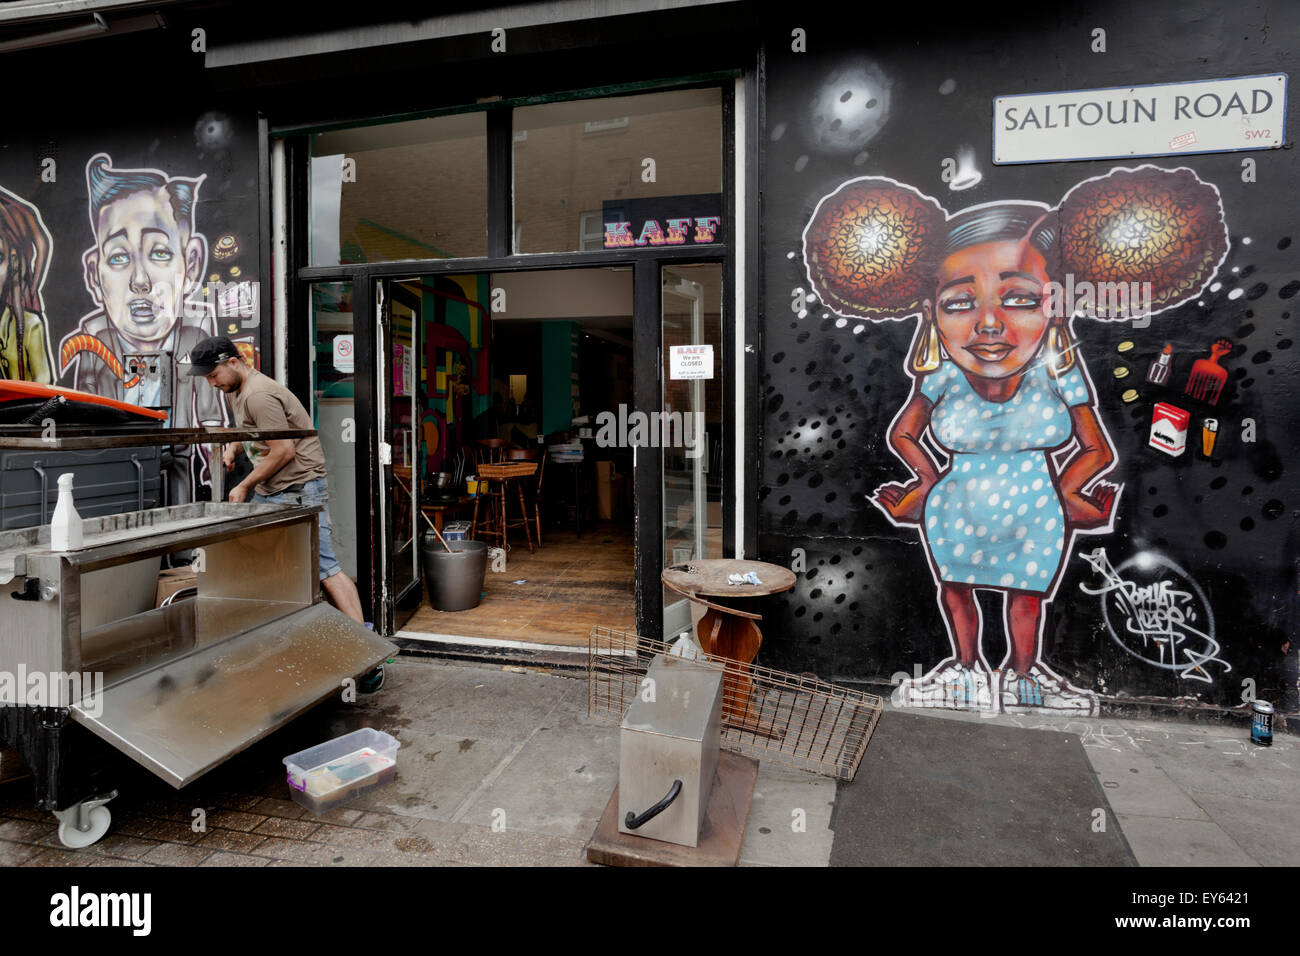 Brixton, London, UK. 22nd July, 2015. The popular Kaff Bar on Atlantic Road in Brixton has been forced to close due to the landlord tripling the rent.  Co-owner Stephen Ross starts the clear out which will include covering up the acclaimed street art. Credit:  Honey Salvadori/Alamy Live News Stock Photo